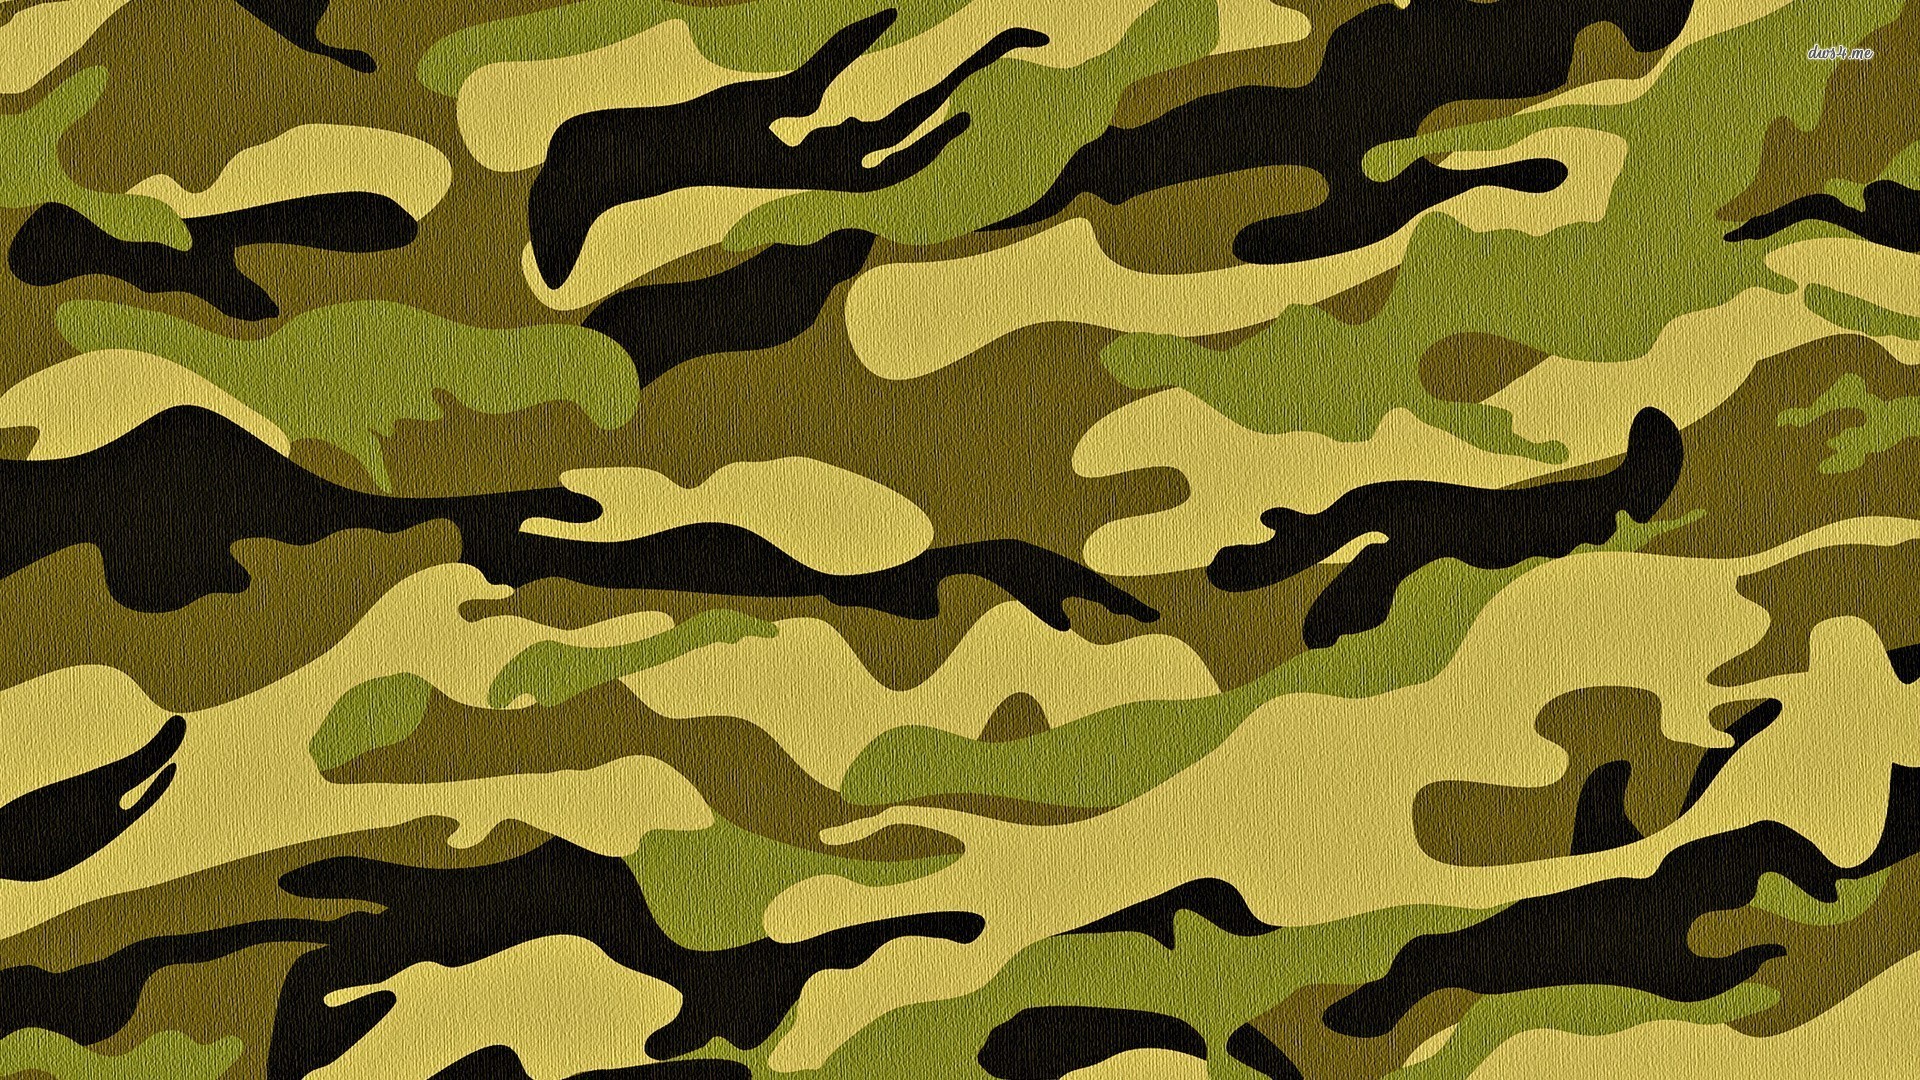 Free download 70 Camouflage Desktop Wallpaper [1920x1080] for your Desktop, Mobile & Tablet. Explore Free Army Camo Wallpaper. Camouflage Wallpaper for Walls, Army Digital Camo Wallpaper, Camouflage Background Wallpaper